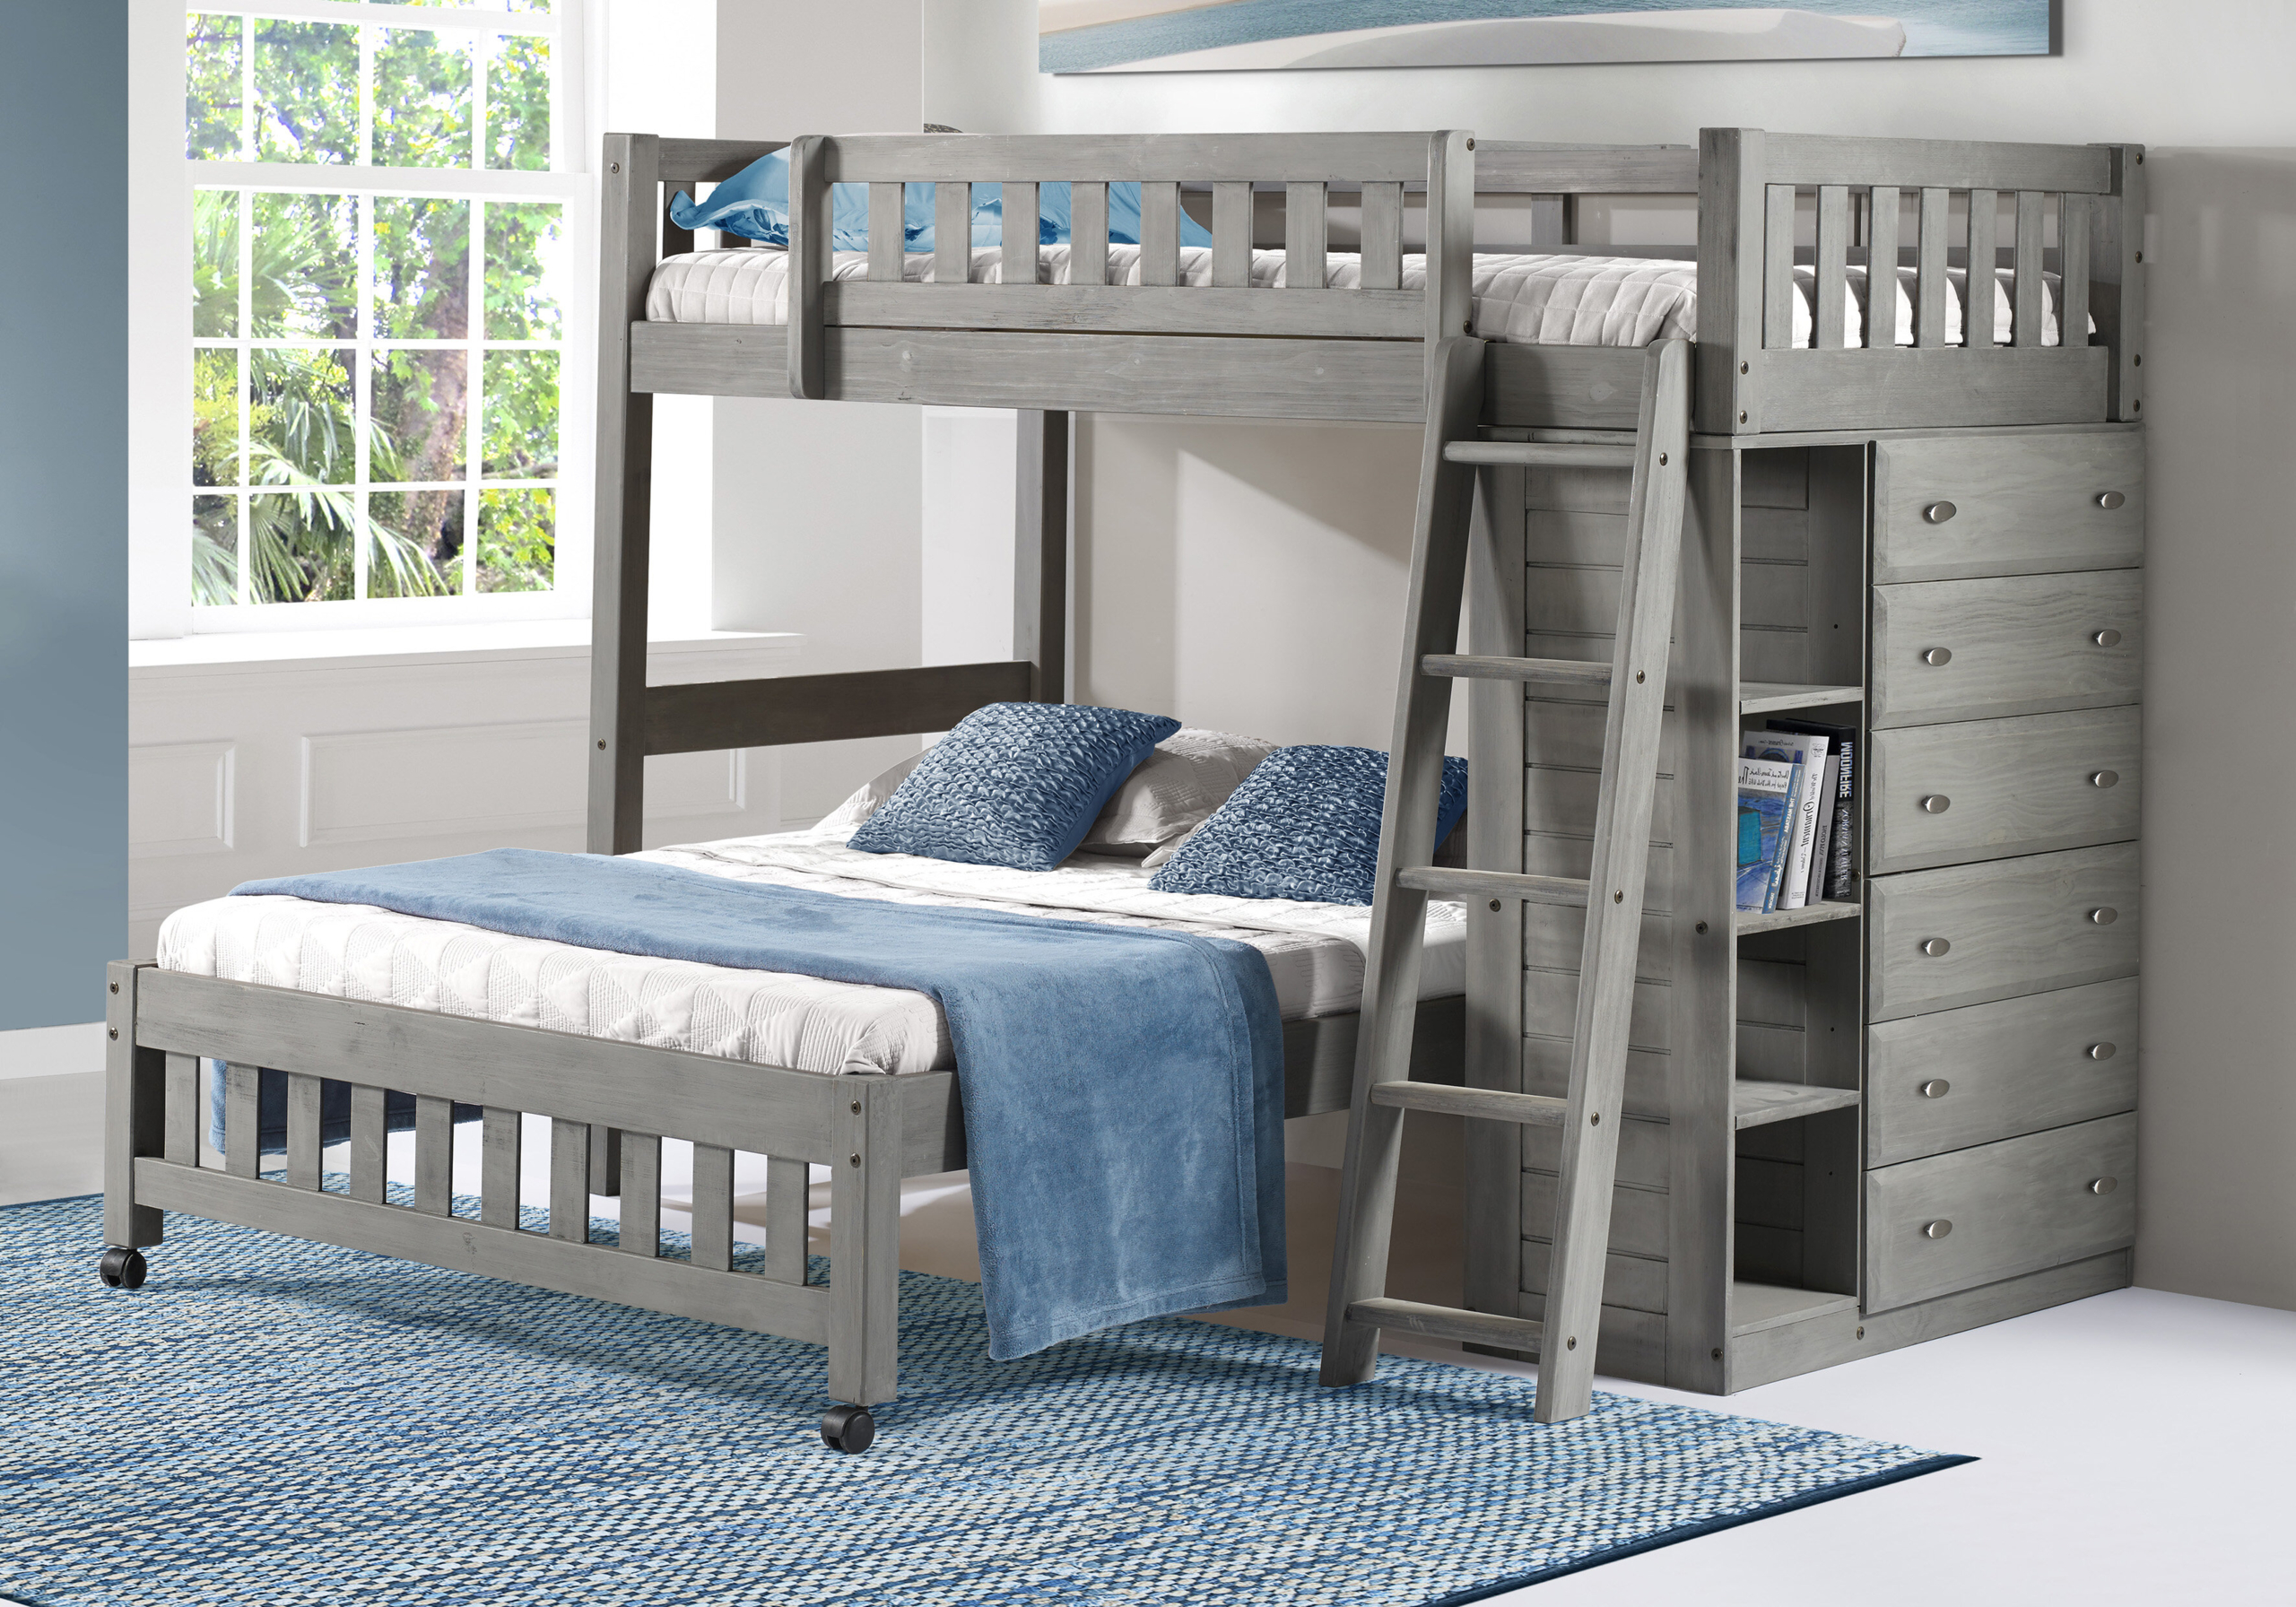 Bunk Beds With Dressers Visualhunt, Twin Over Double Bunk Bed